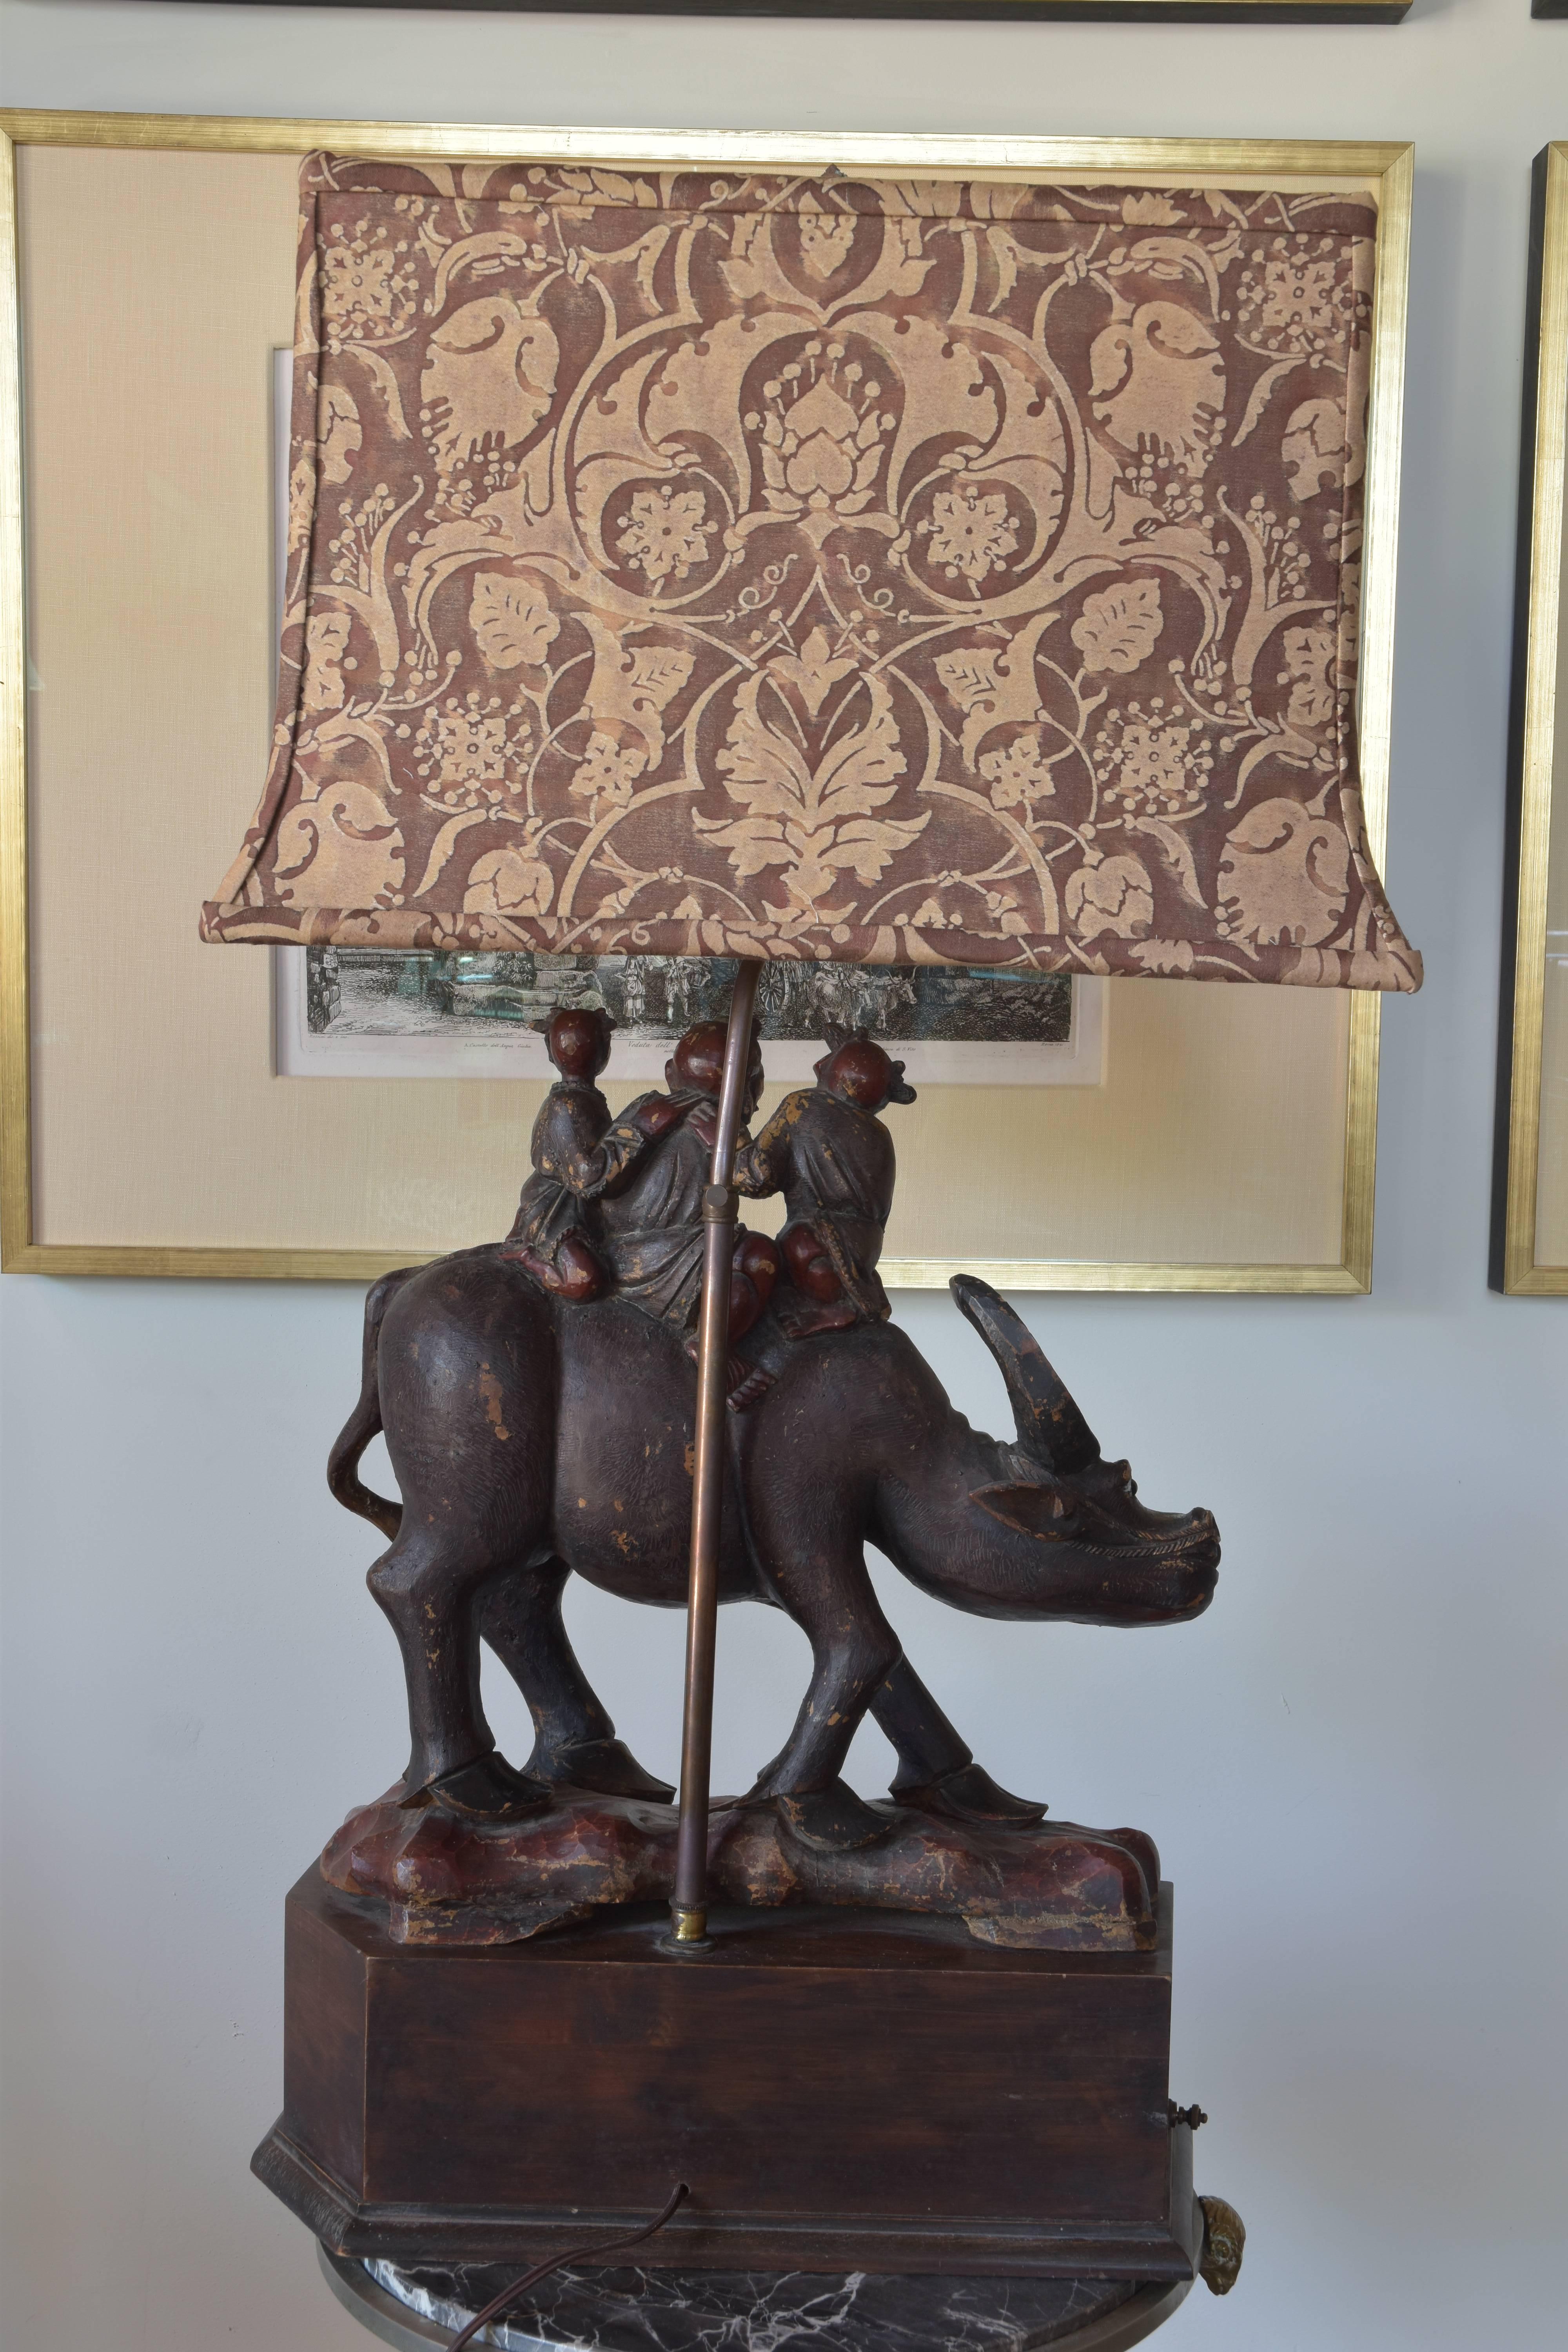 An exceptional Chinese export lamp from the early 20th century of an ox or water buffalo with three small children atop. The figure is 19th century wired as a lamp in the 20th century. A charming lamp with an amazing custom Fortuny lampshade